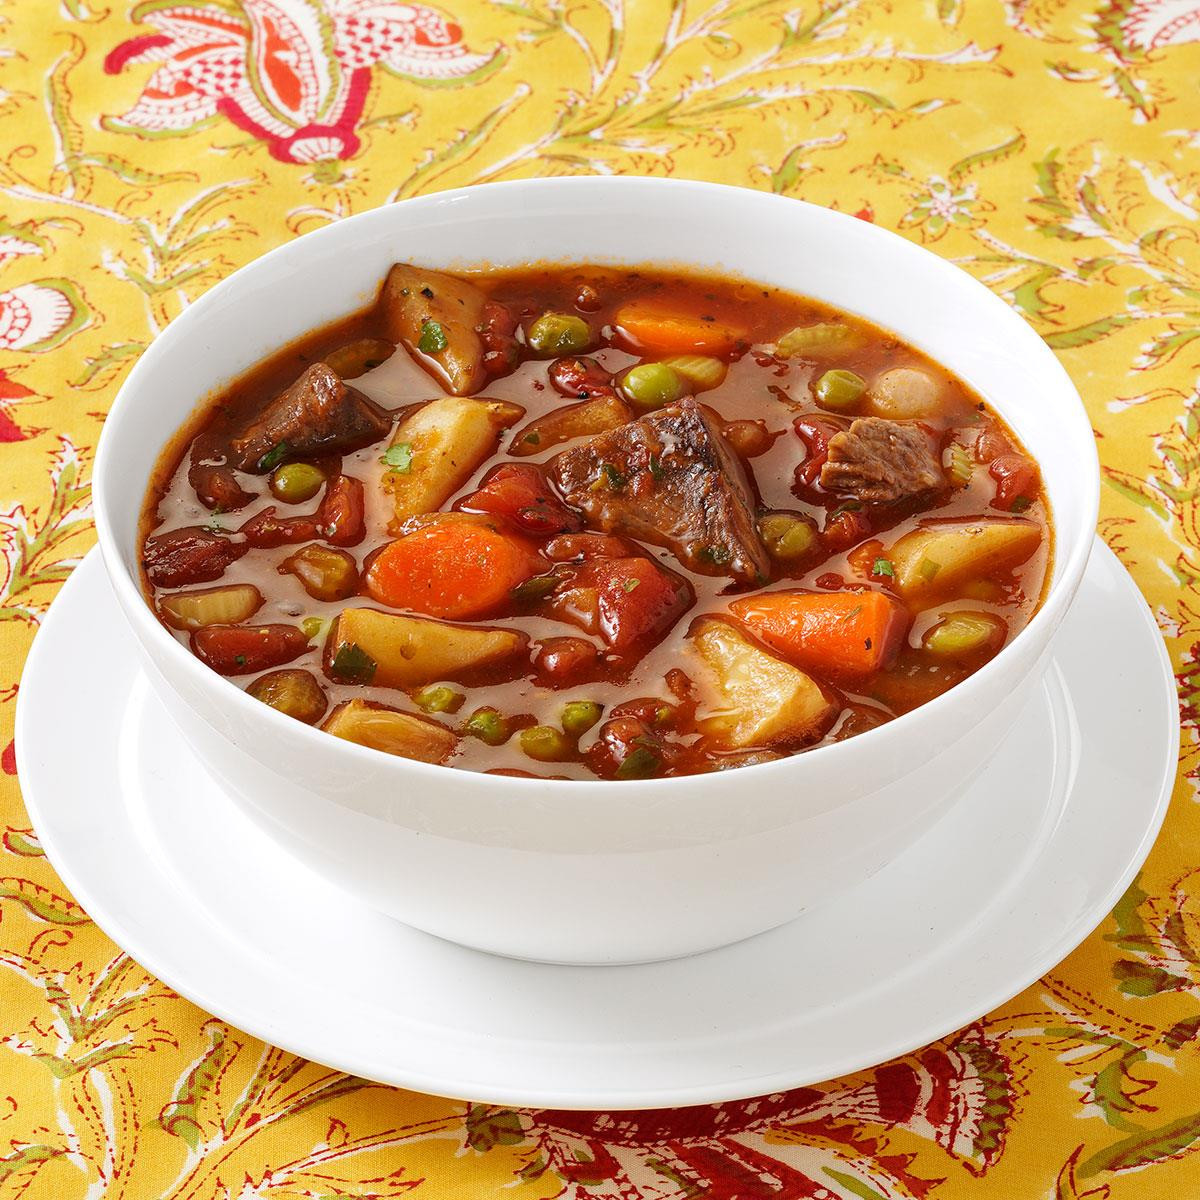 Beef Stew Recipe Stove Top
 Stovetop Beef Stew Recipe